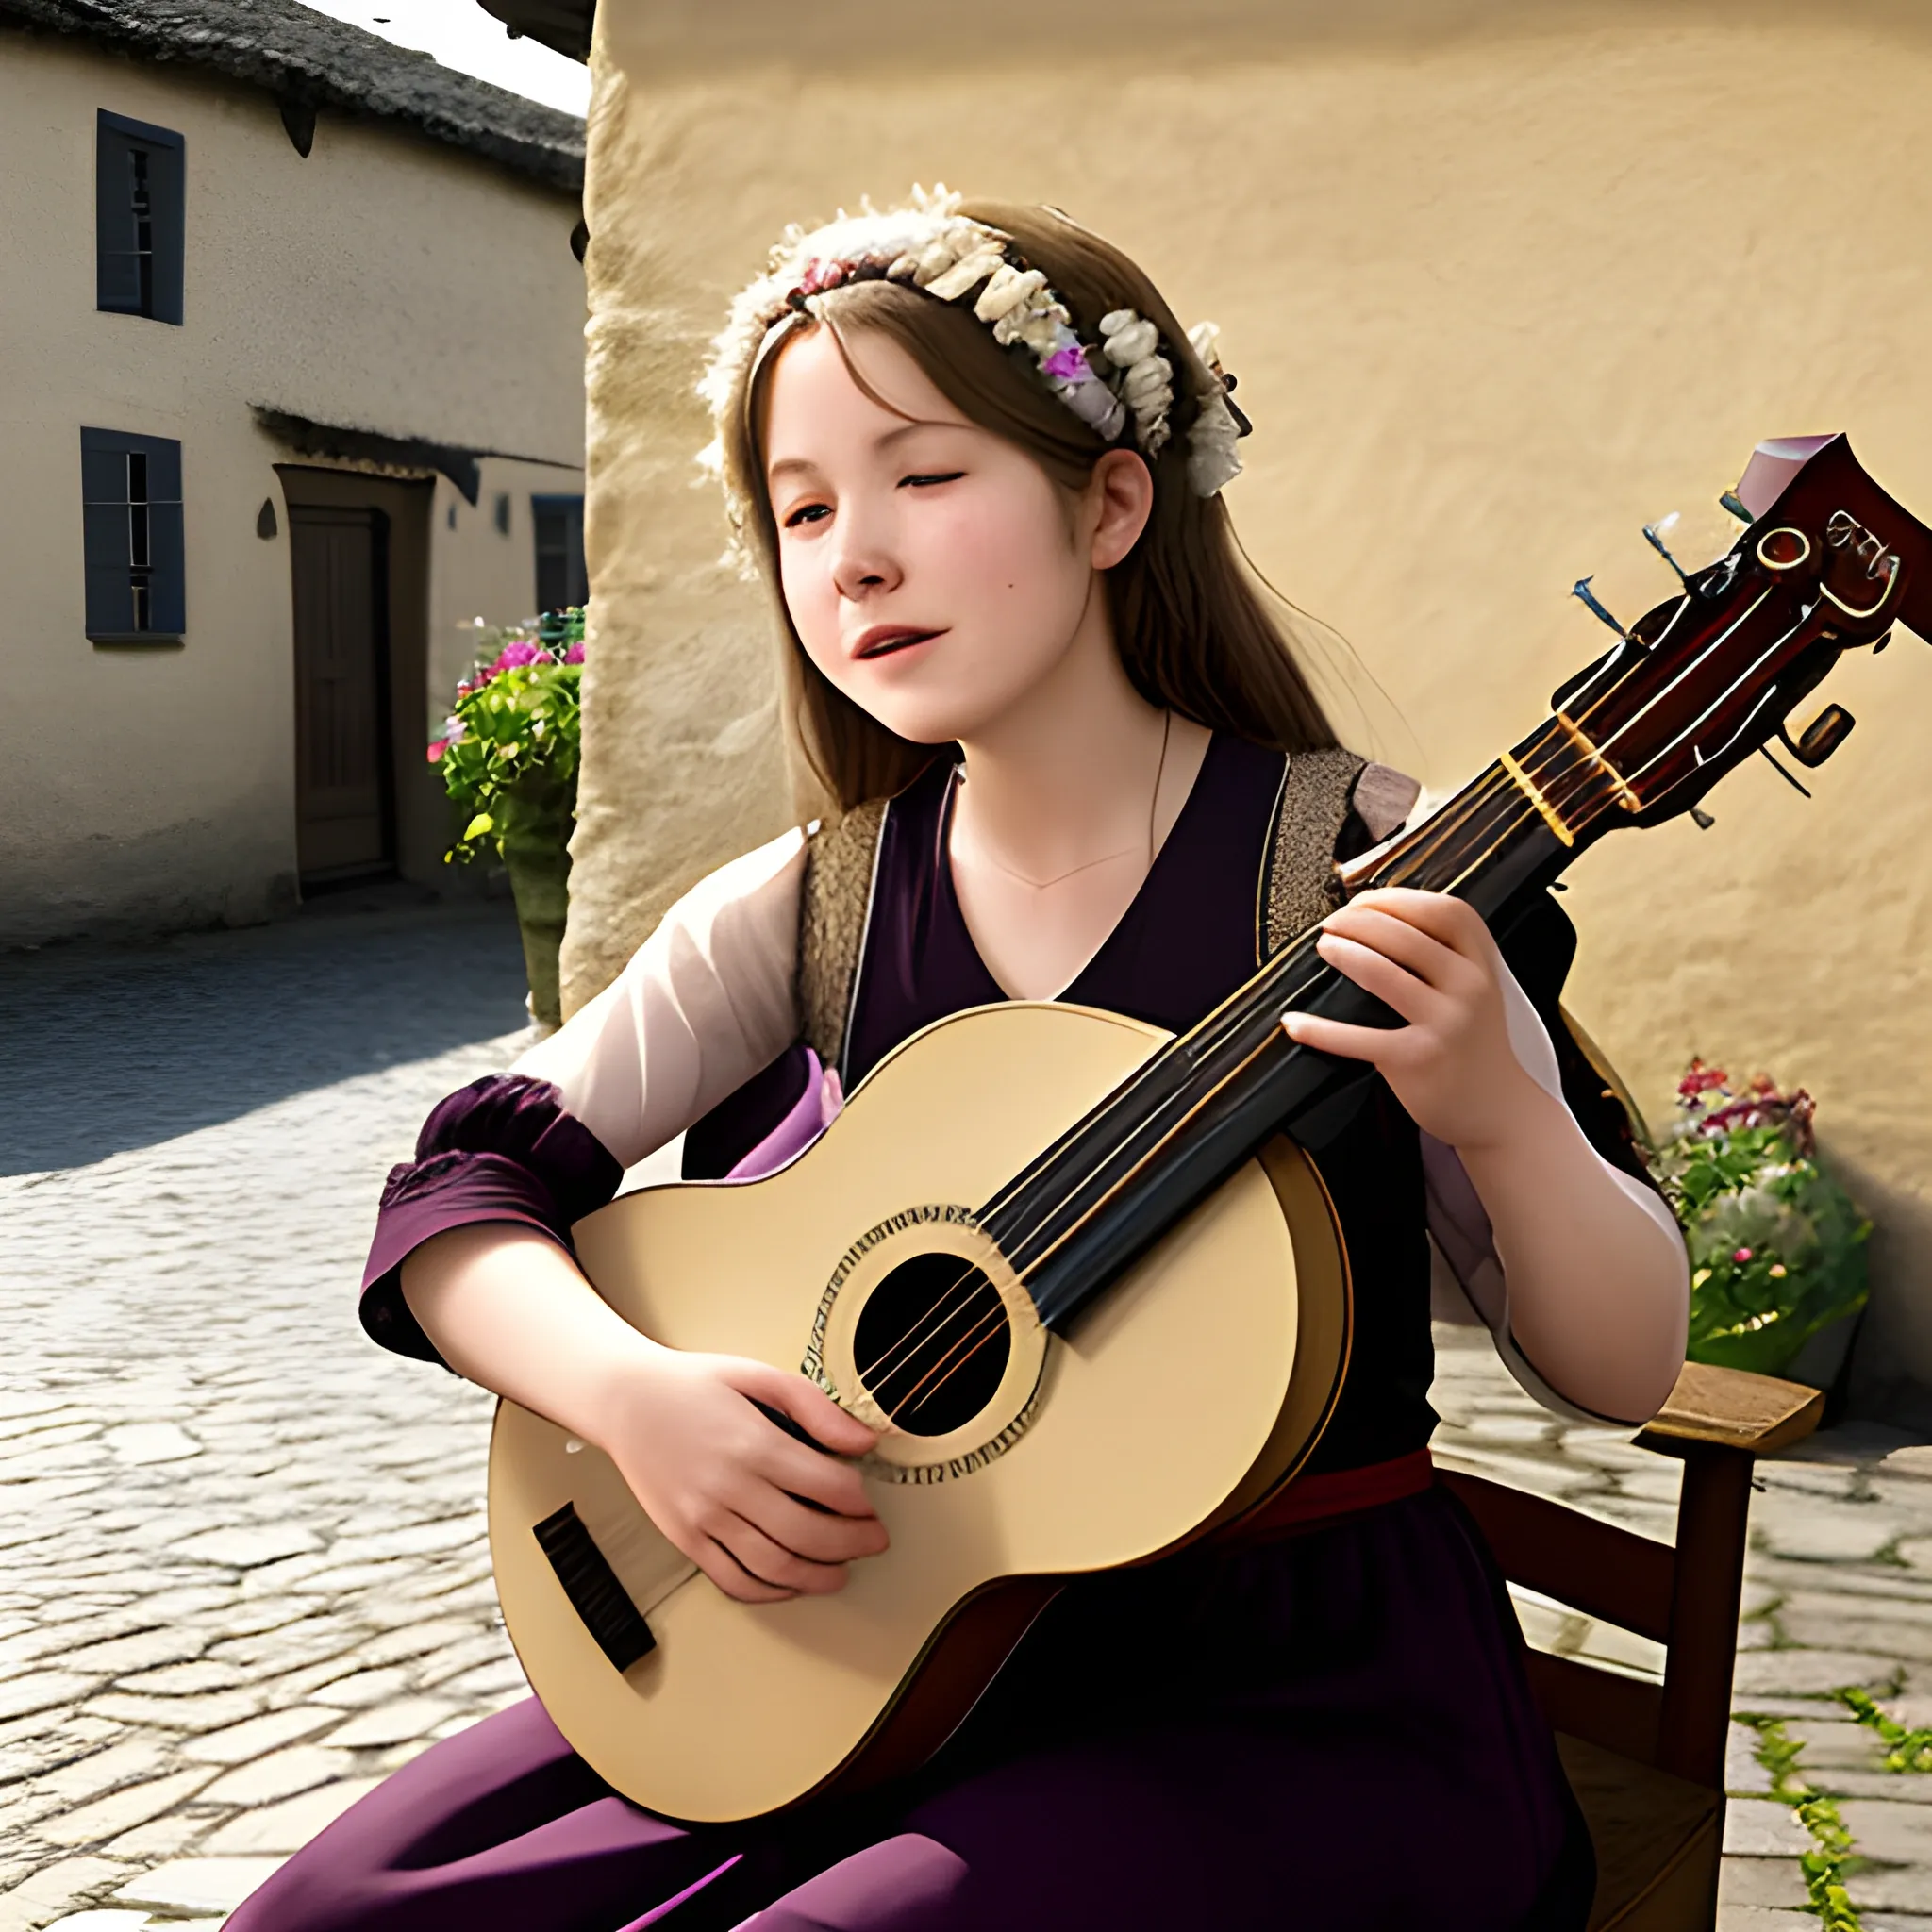 Olivia the Musician: Olivia, a talented human bard, can often be found playing her lute or singing ballads in the village square. Her melodic tunes lift the spirits of the villagers and create a sense of harmony within the community.